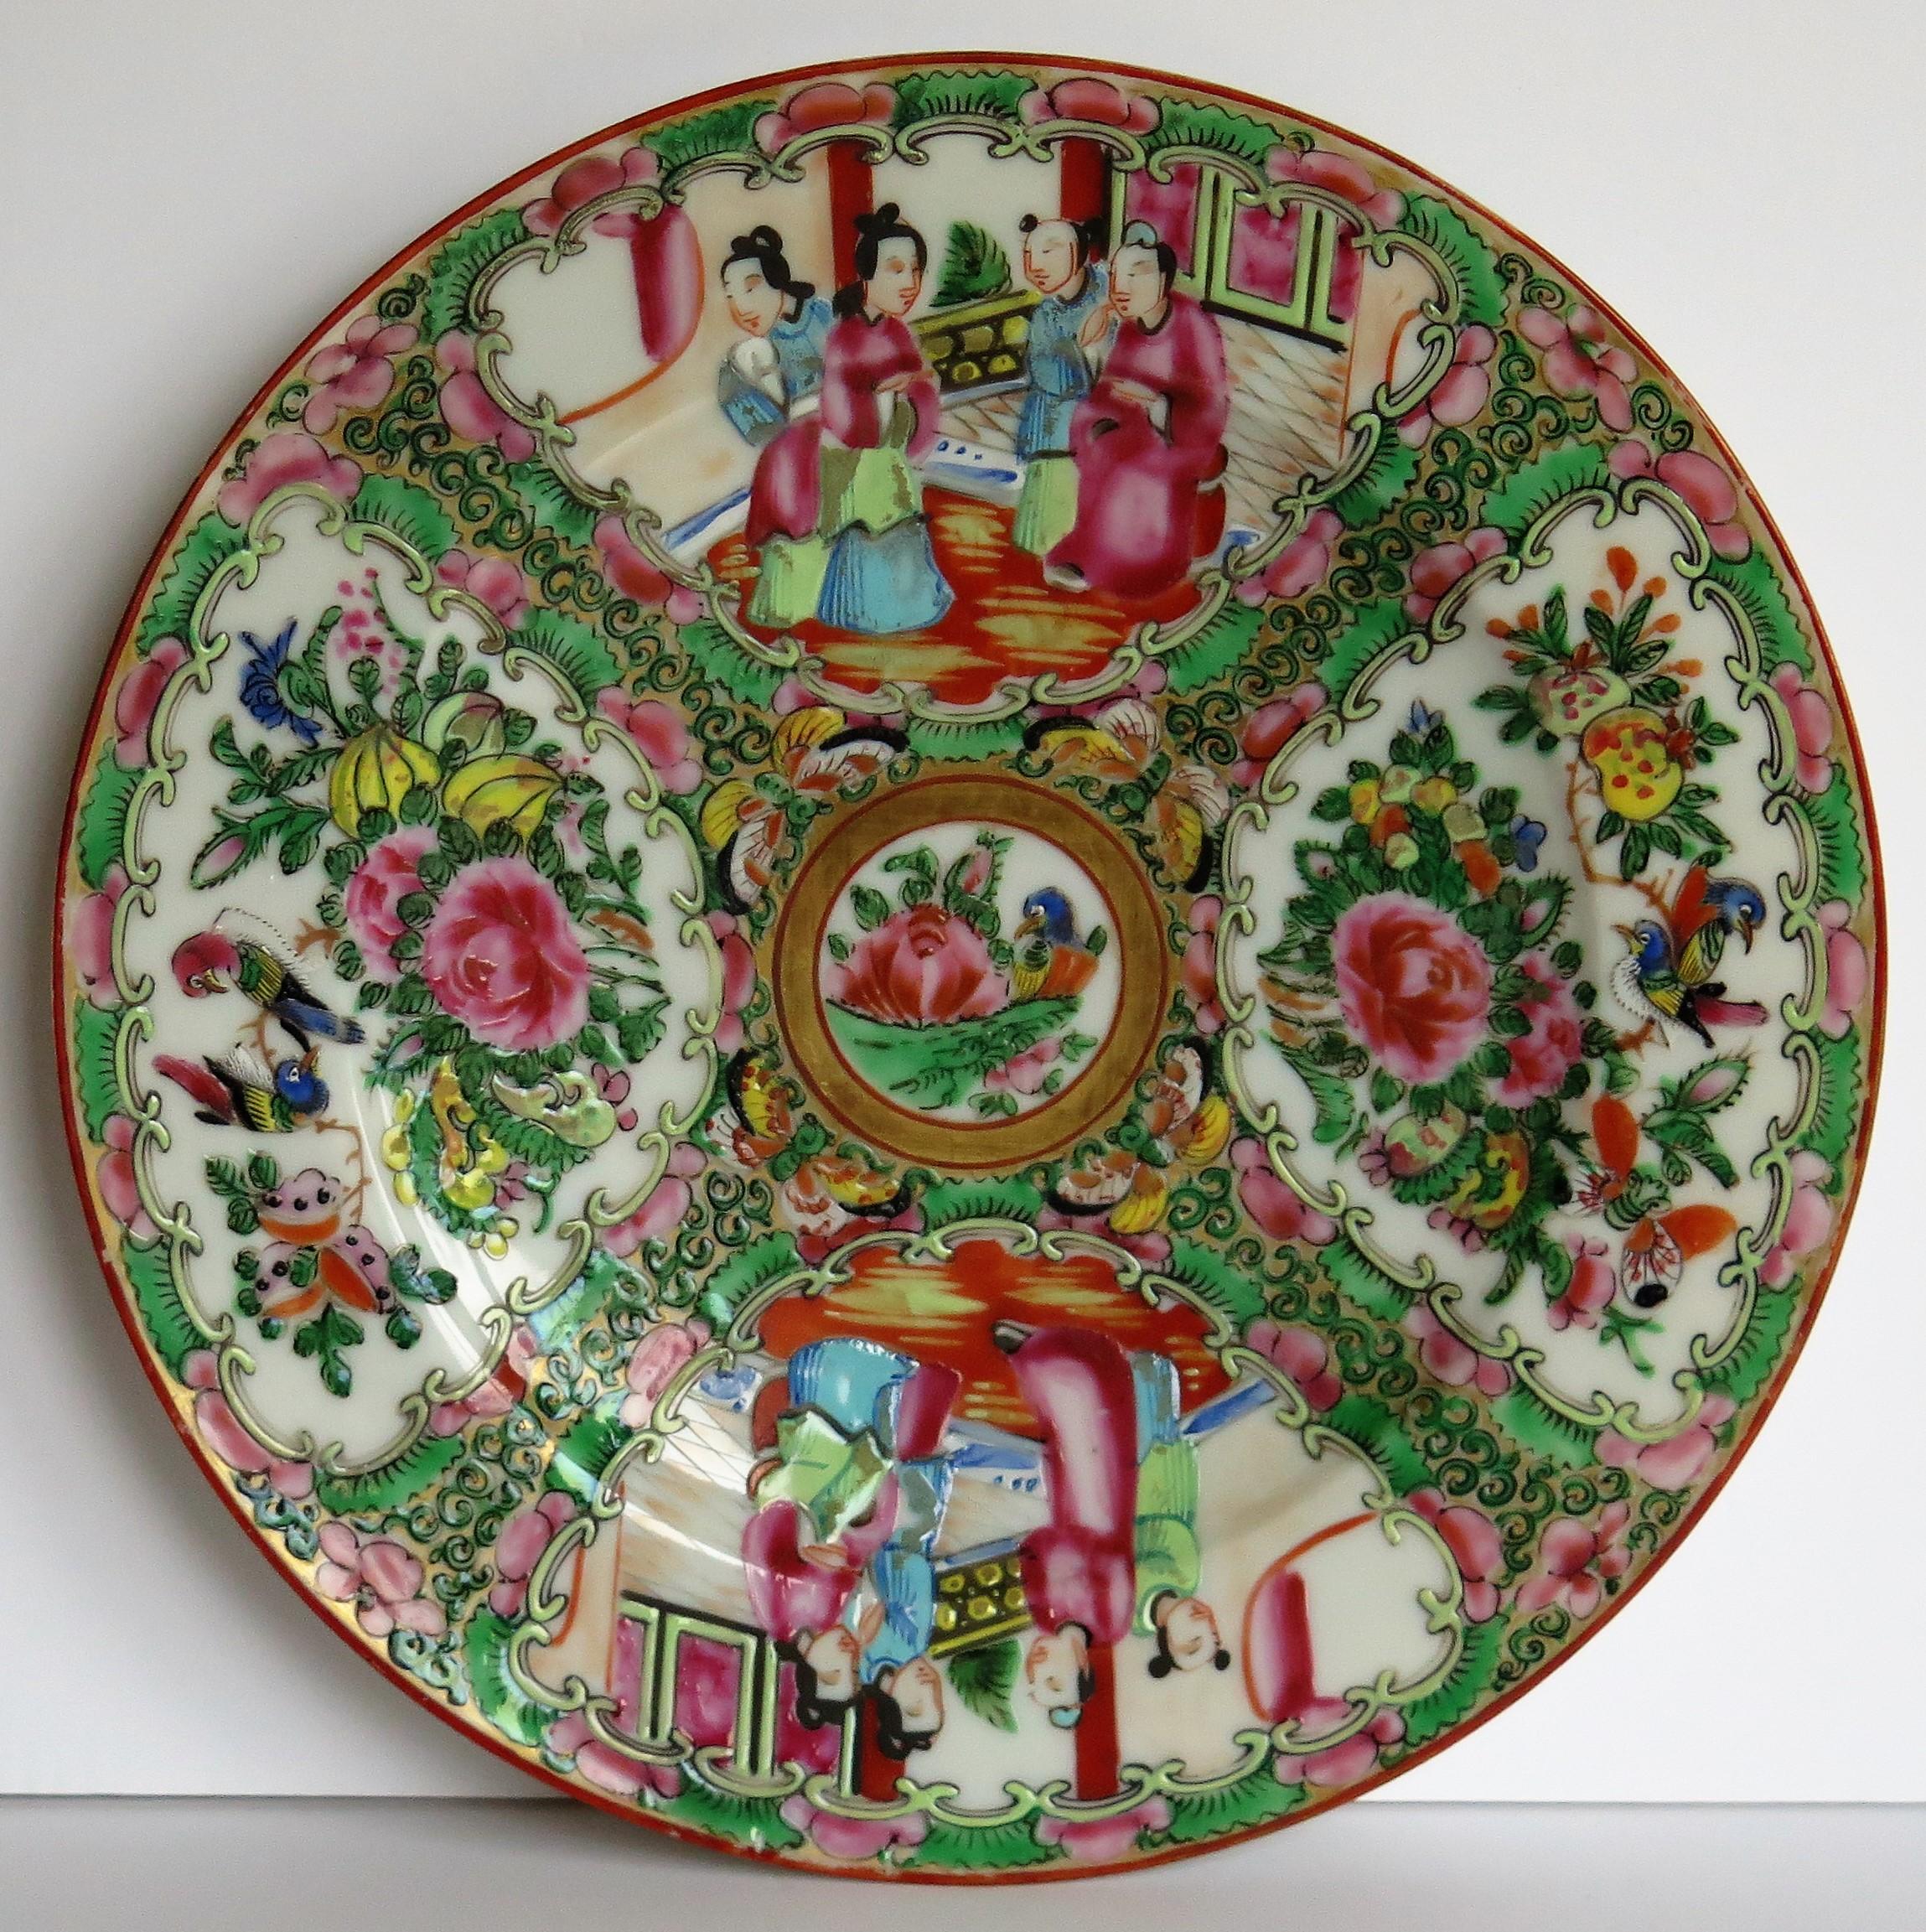 This is a very decorative Chinese Export, porcelain, Rose Medallion dish or plate which we date to the 19th century, Qing dynasty, circa 1870.

It is hand-painted in the Canton or Chinese export, rose medallion decoration with four panels